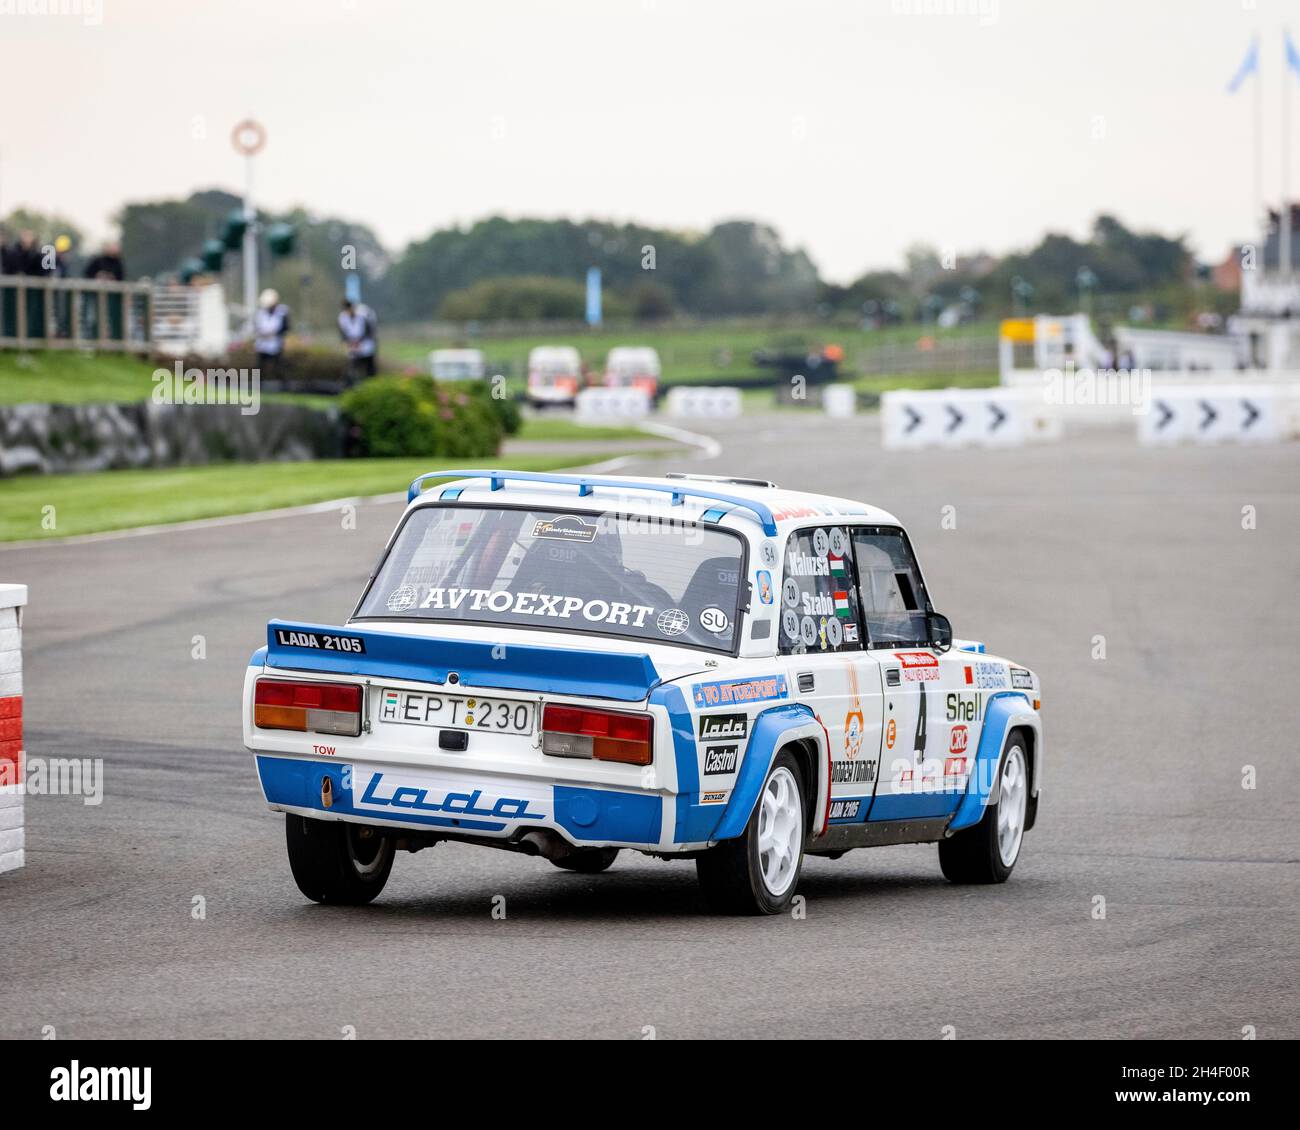 Lada 2105 VFTS rally car with driver Tim Bendle during the Super Special stage at Goodwood 78th Members Meeting, Sussex, UK. Stock Photo